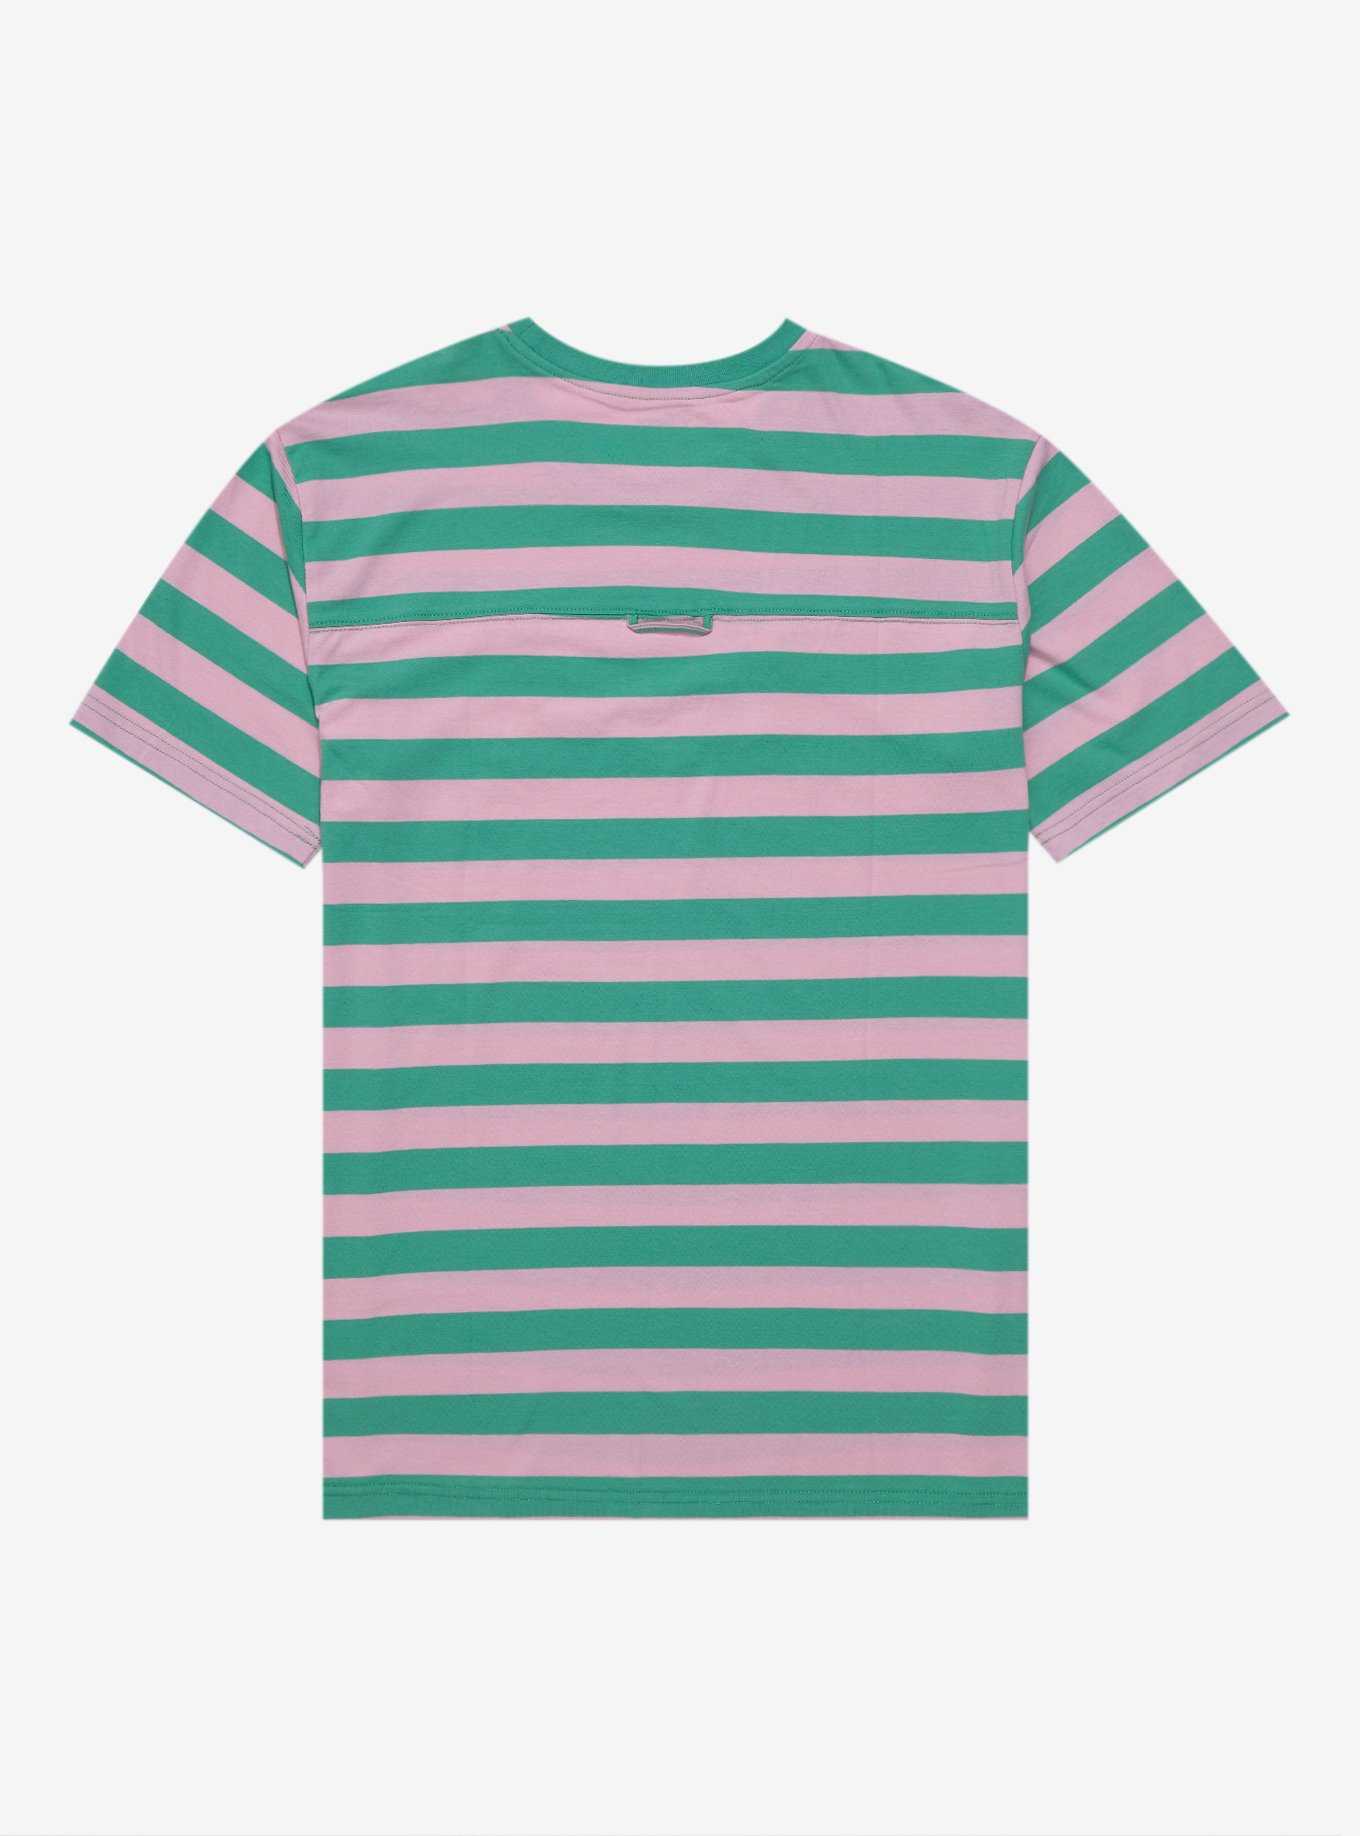 Disney The Little Mermaid Ariel Icons Striped T- Shirt - BoxLunch Exclusive, , hi-res